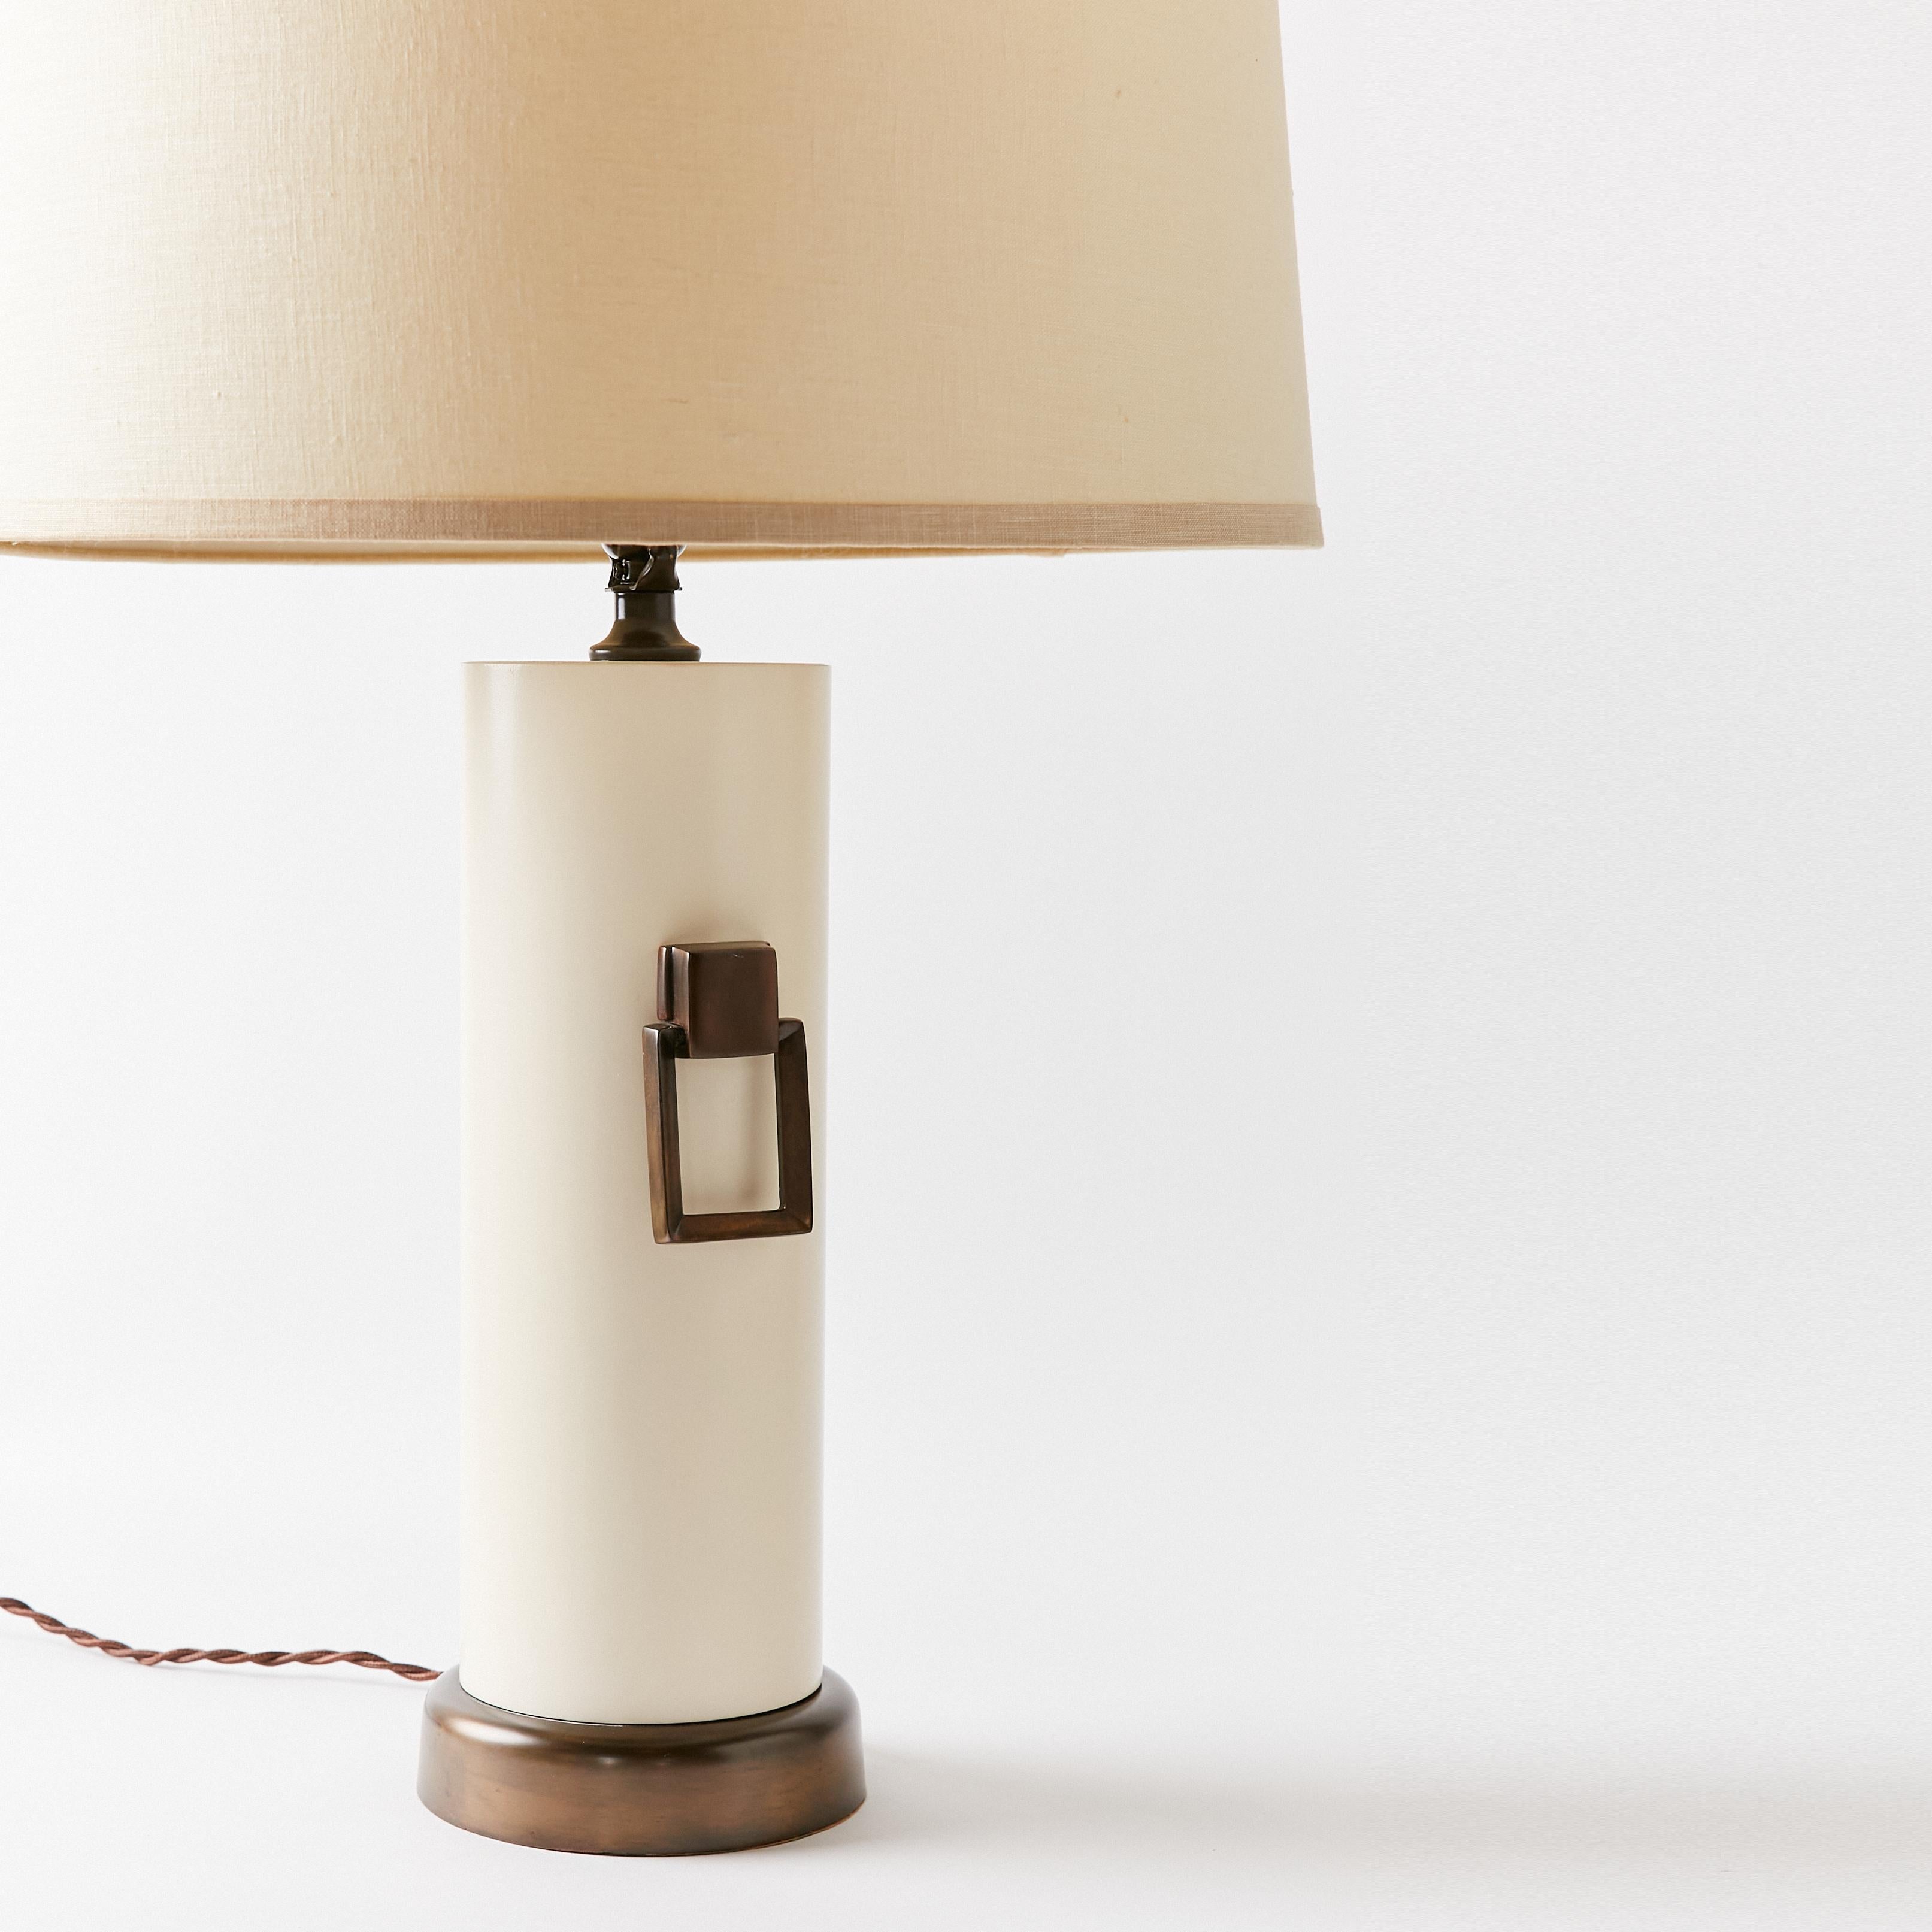 Mid-Century Modern Mid-Century Table Lamp Finished in Off White with Antique Bronze Accents